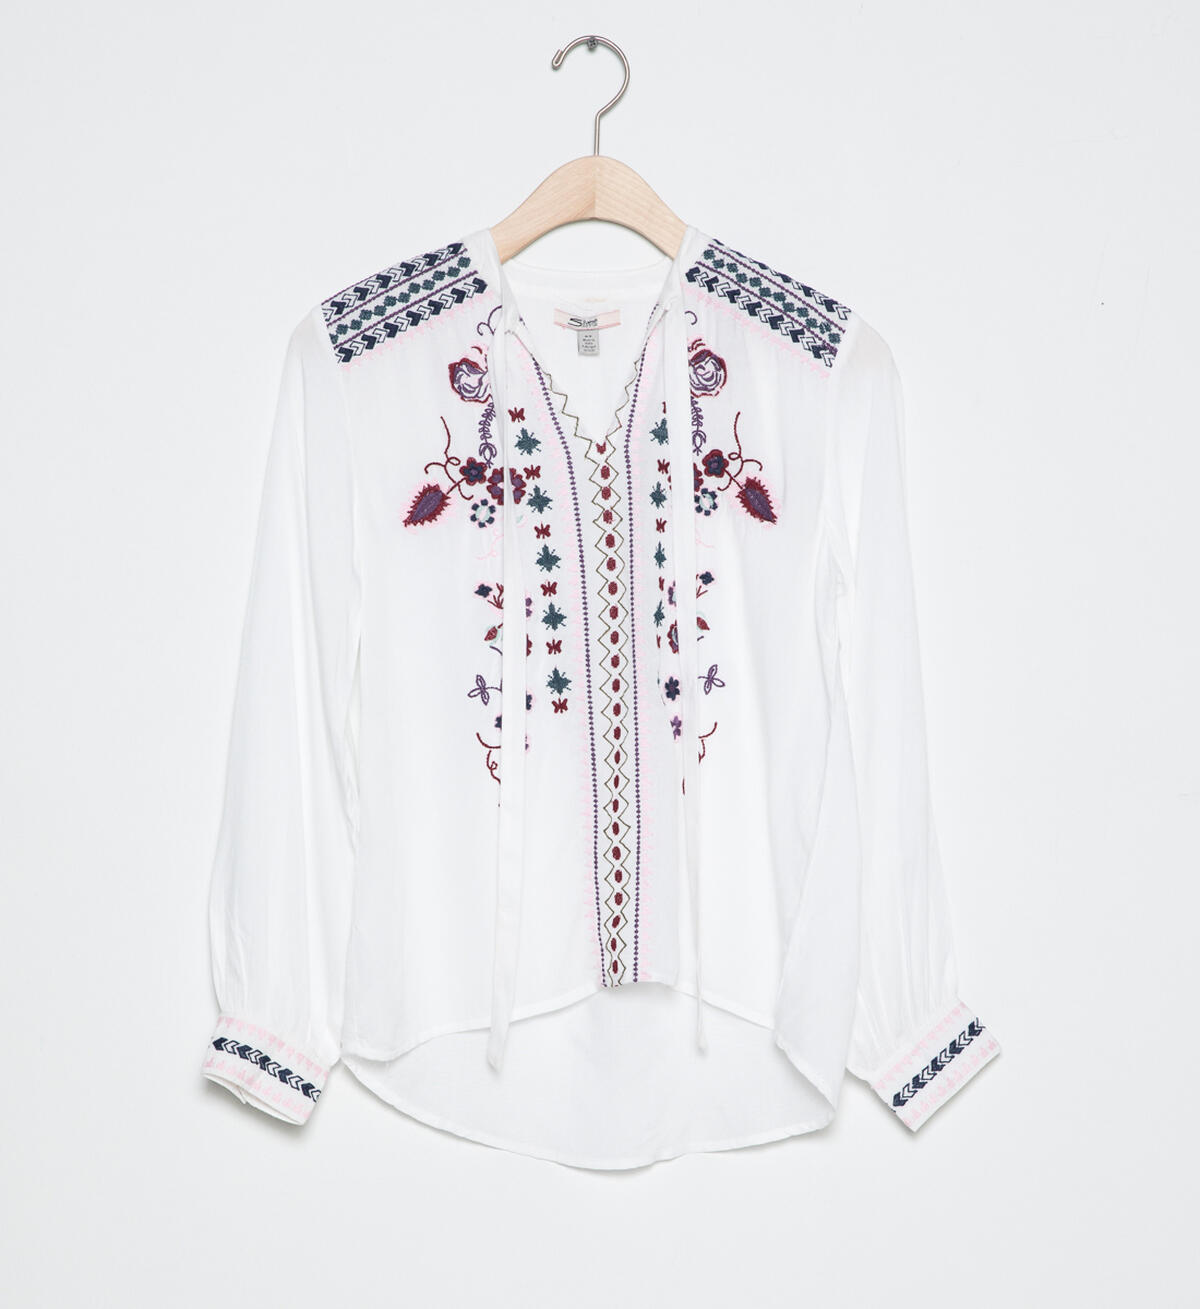 Long-Sleeve Embroidered Peasant Top (7-16), , hi-res image number 0